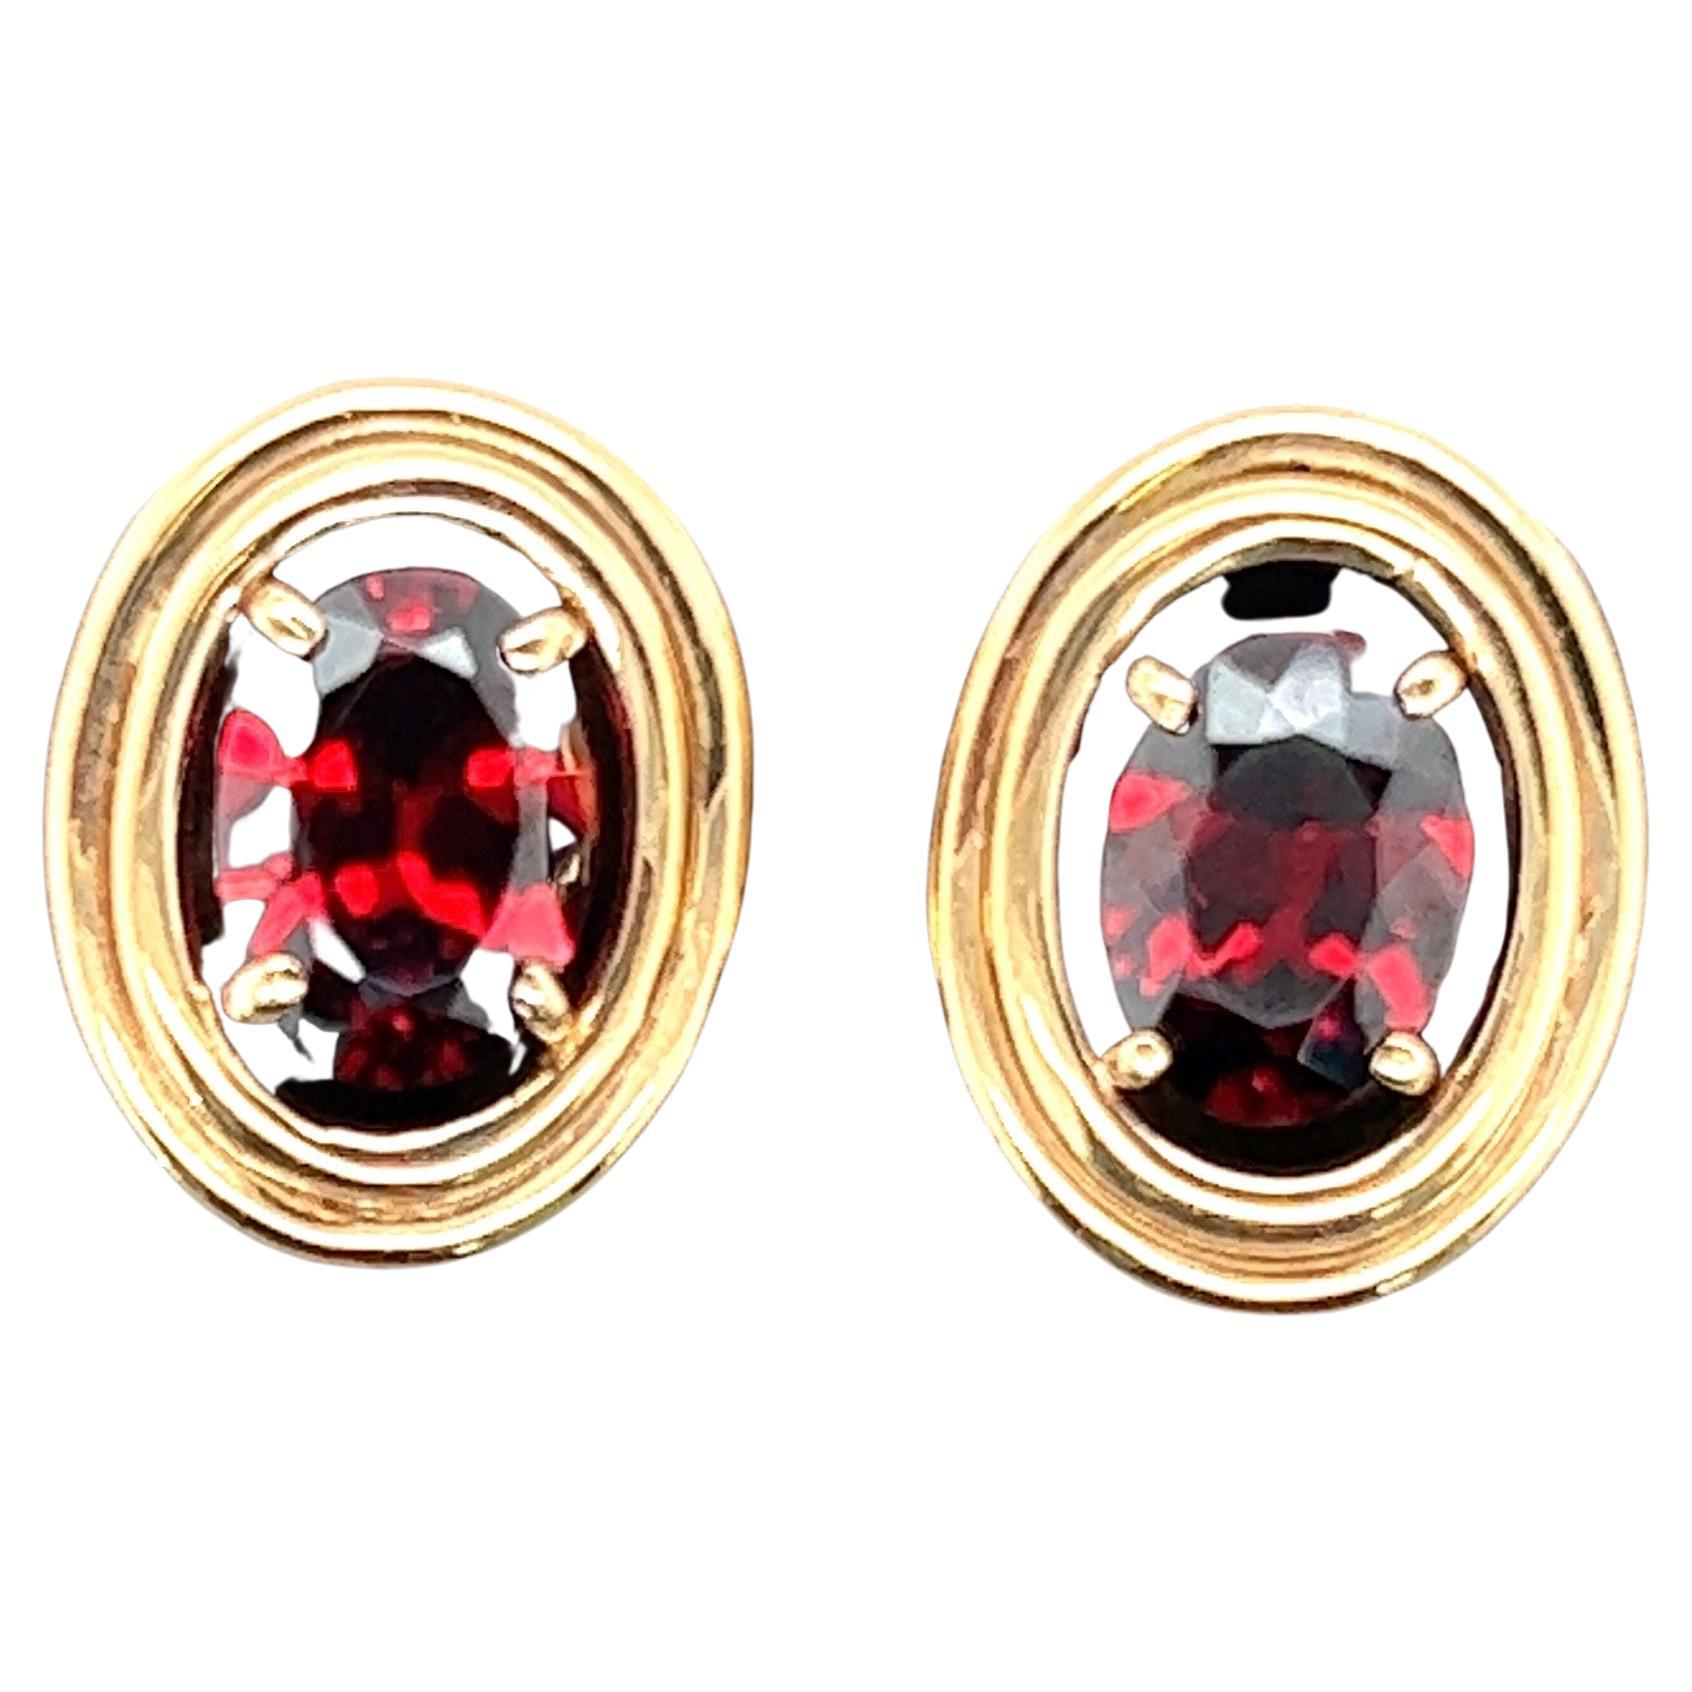 Sparkly like crazy garnet clip on earrings! The garnets in these earrings are clear and bright and sparkly! The color is gorgeous. 

The oval earrings measure .75